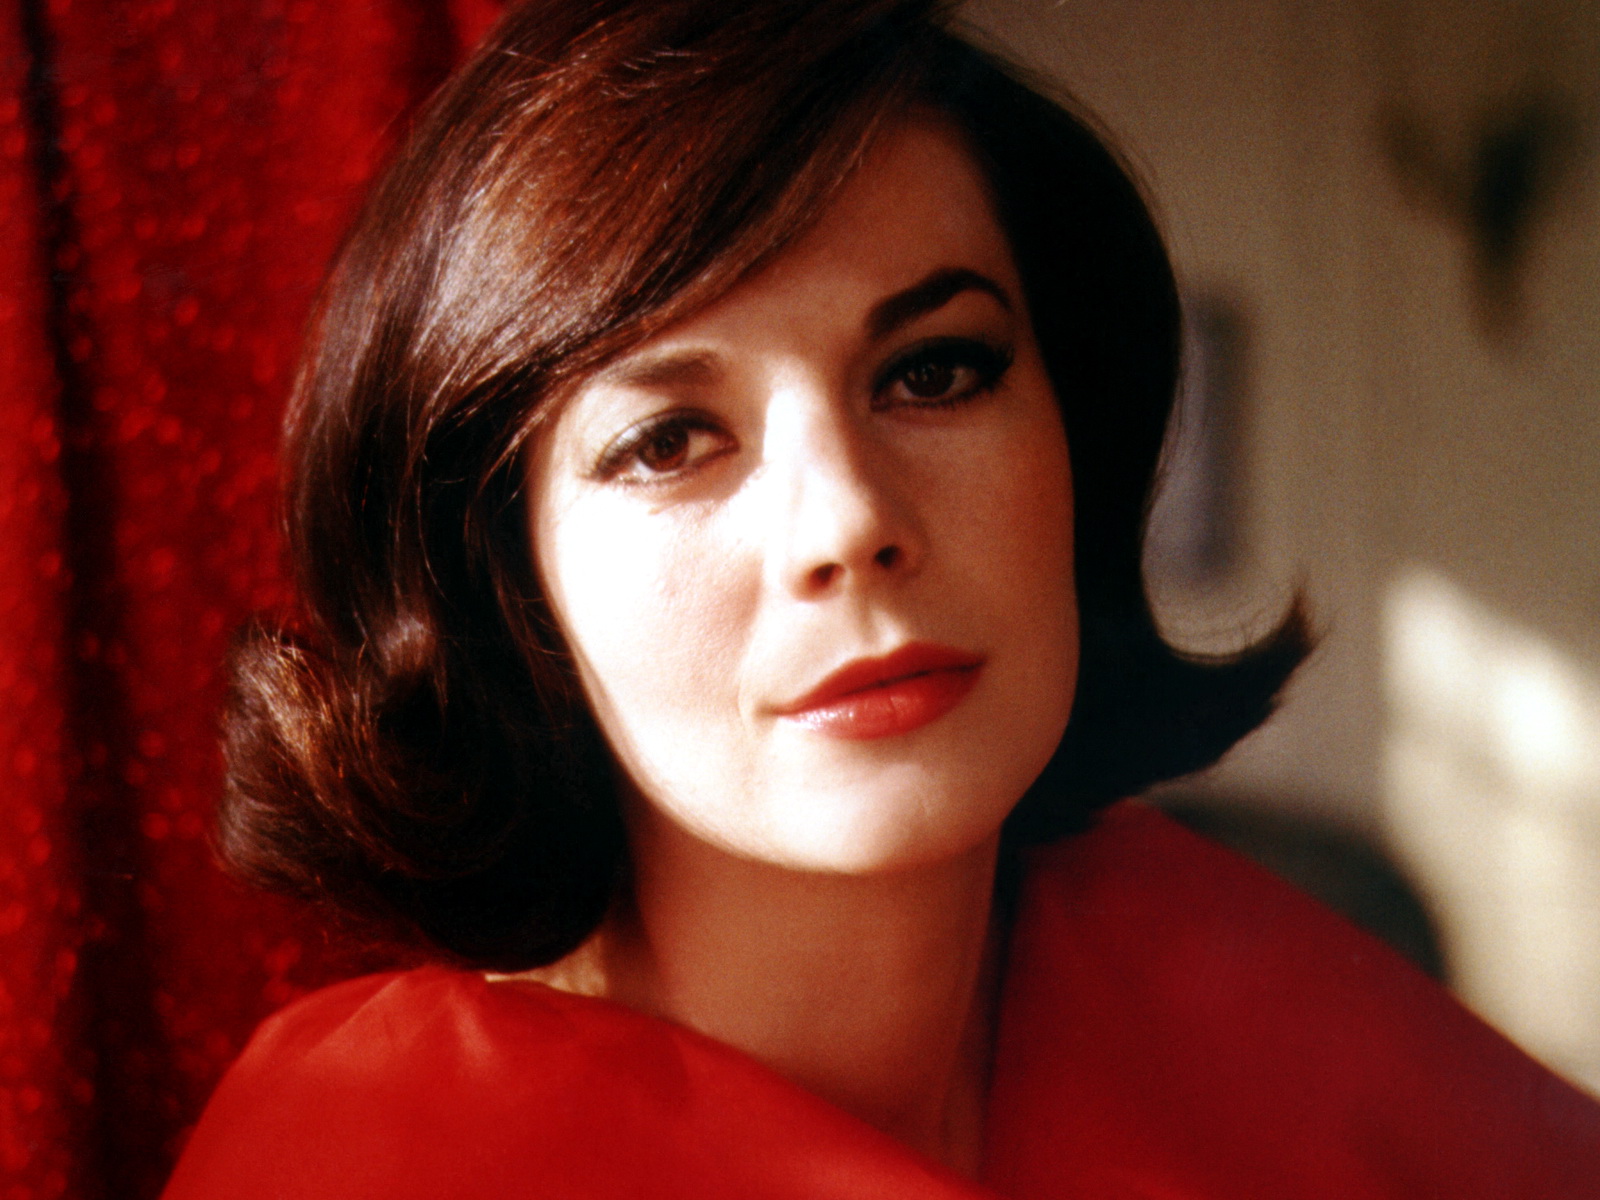 More Pictures Of Natalie Wood. natalie wood net worth. 